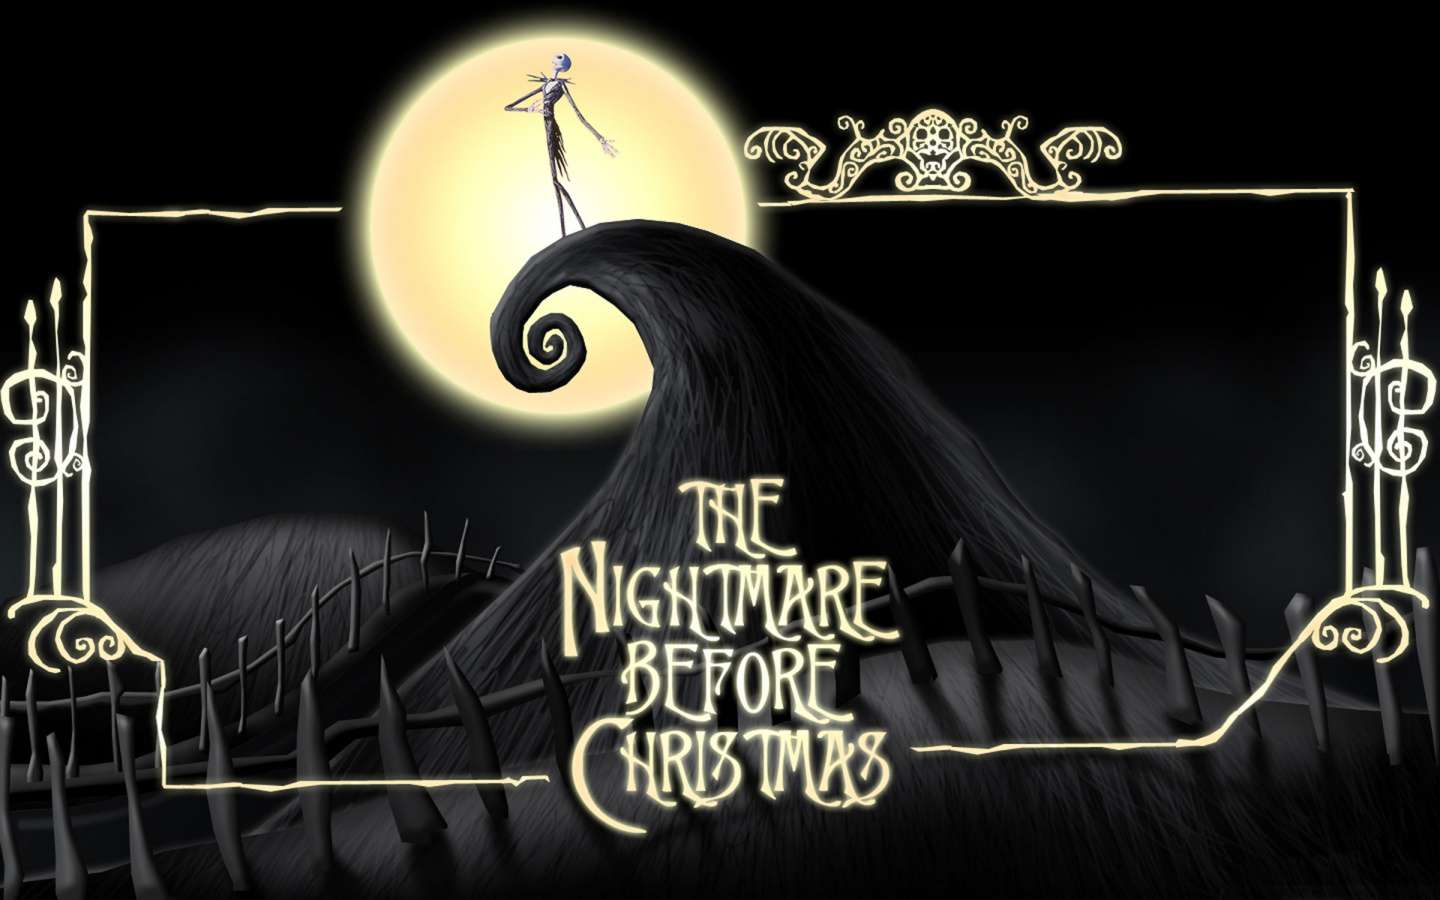 The Nightmare Before Christmas promo